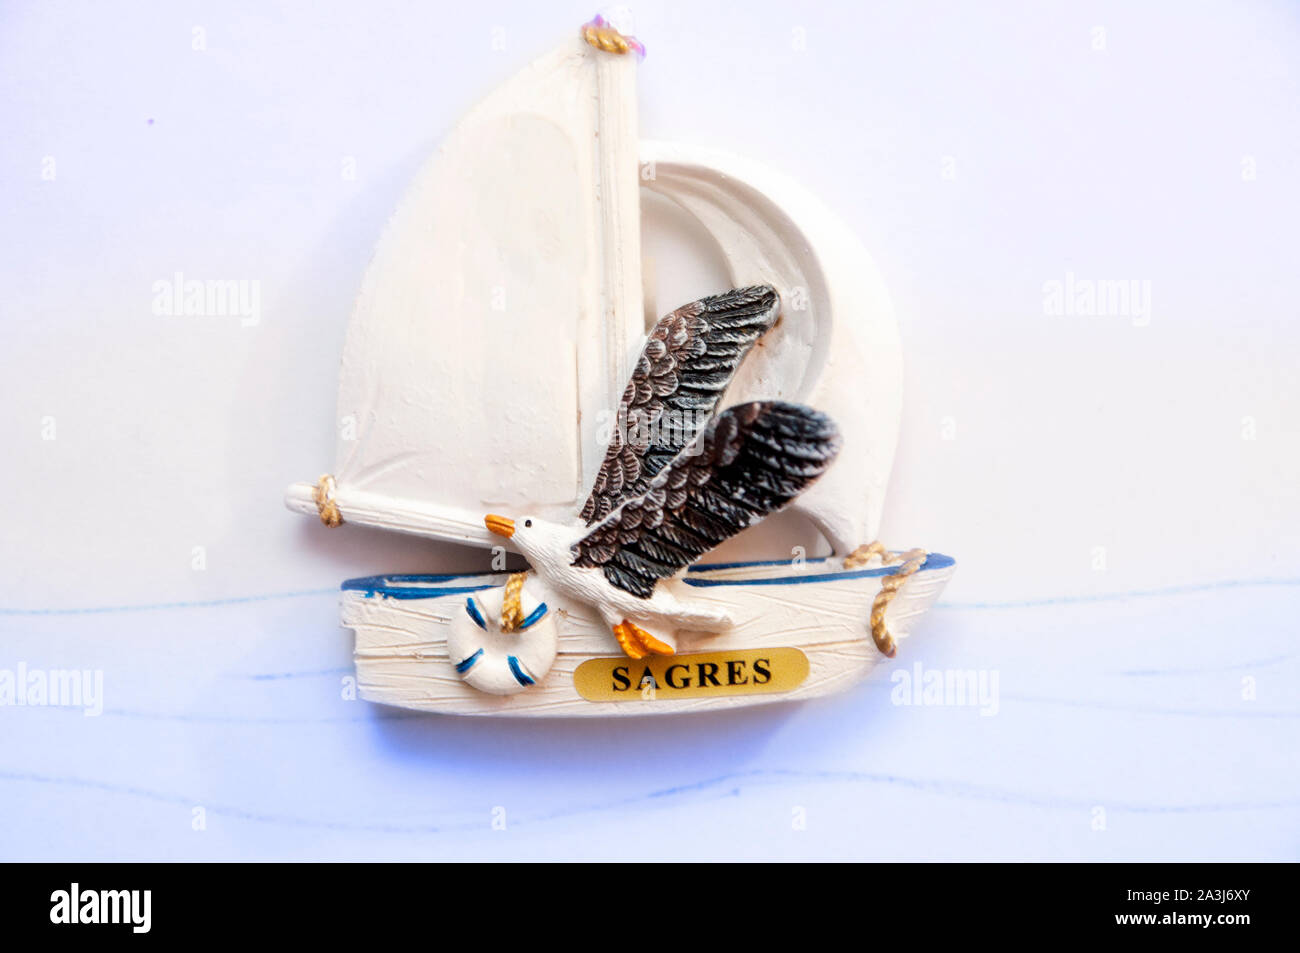 A ceramic souvenir of Sagre representing a sail boat with a seagull flying. Stock Photo